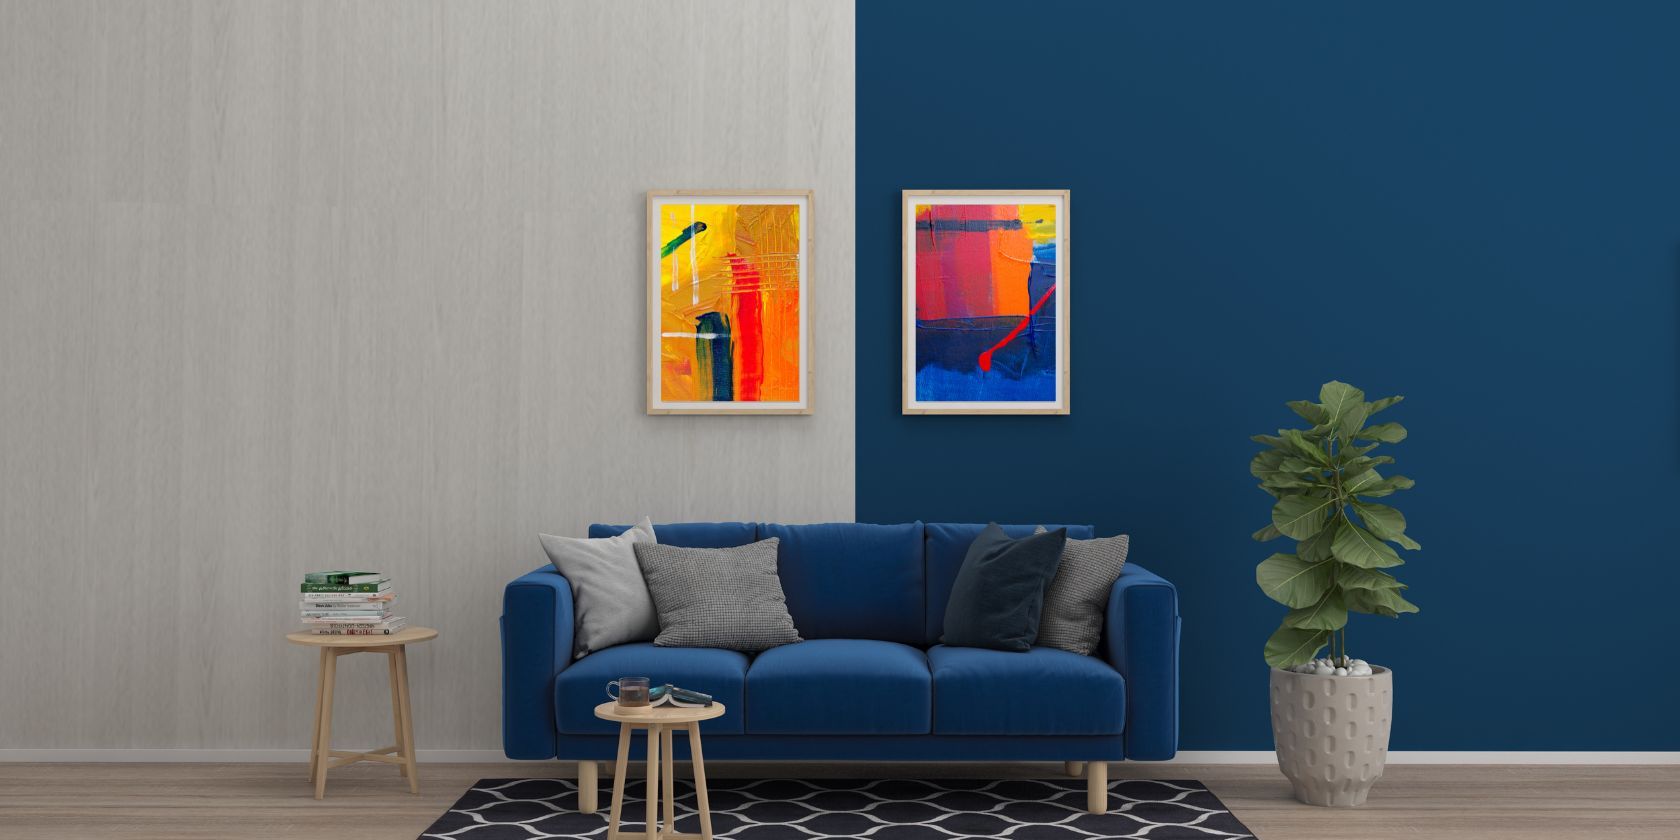 room interior decoration showing couch and frames